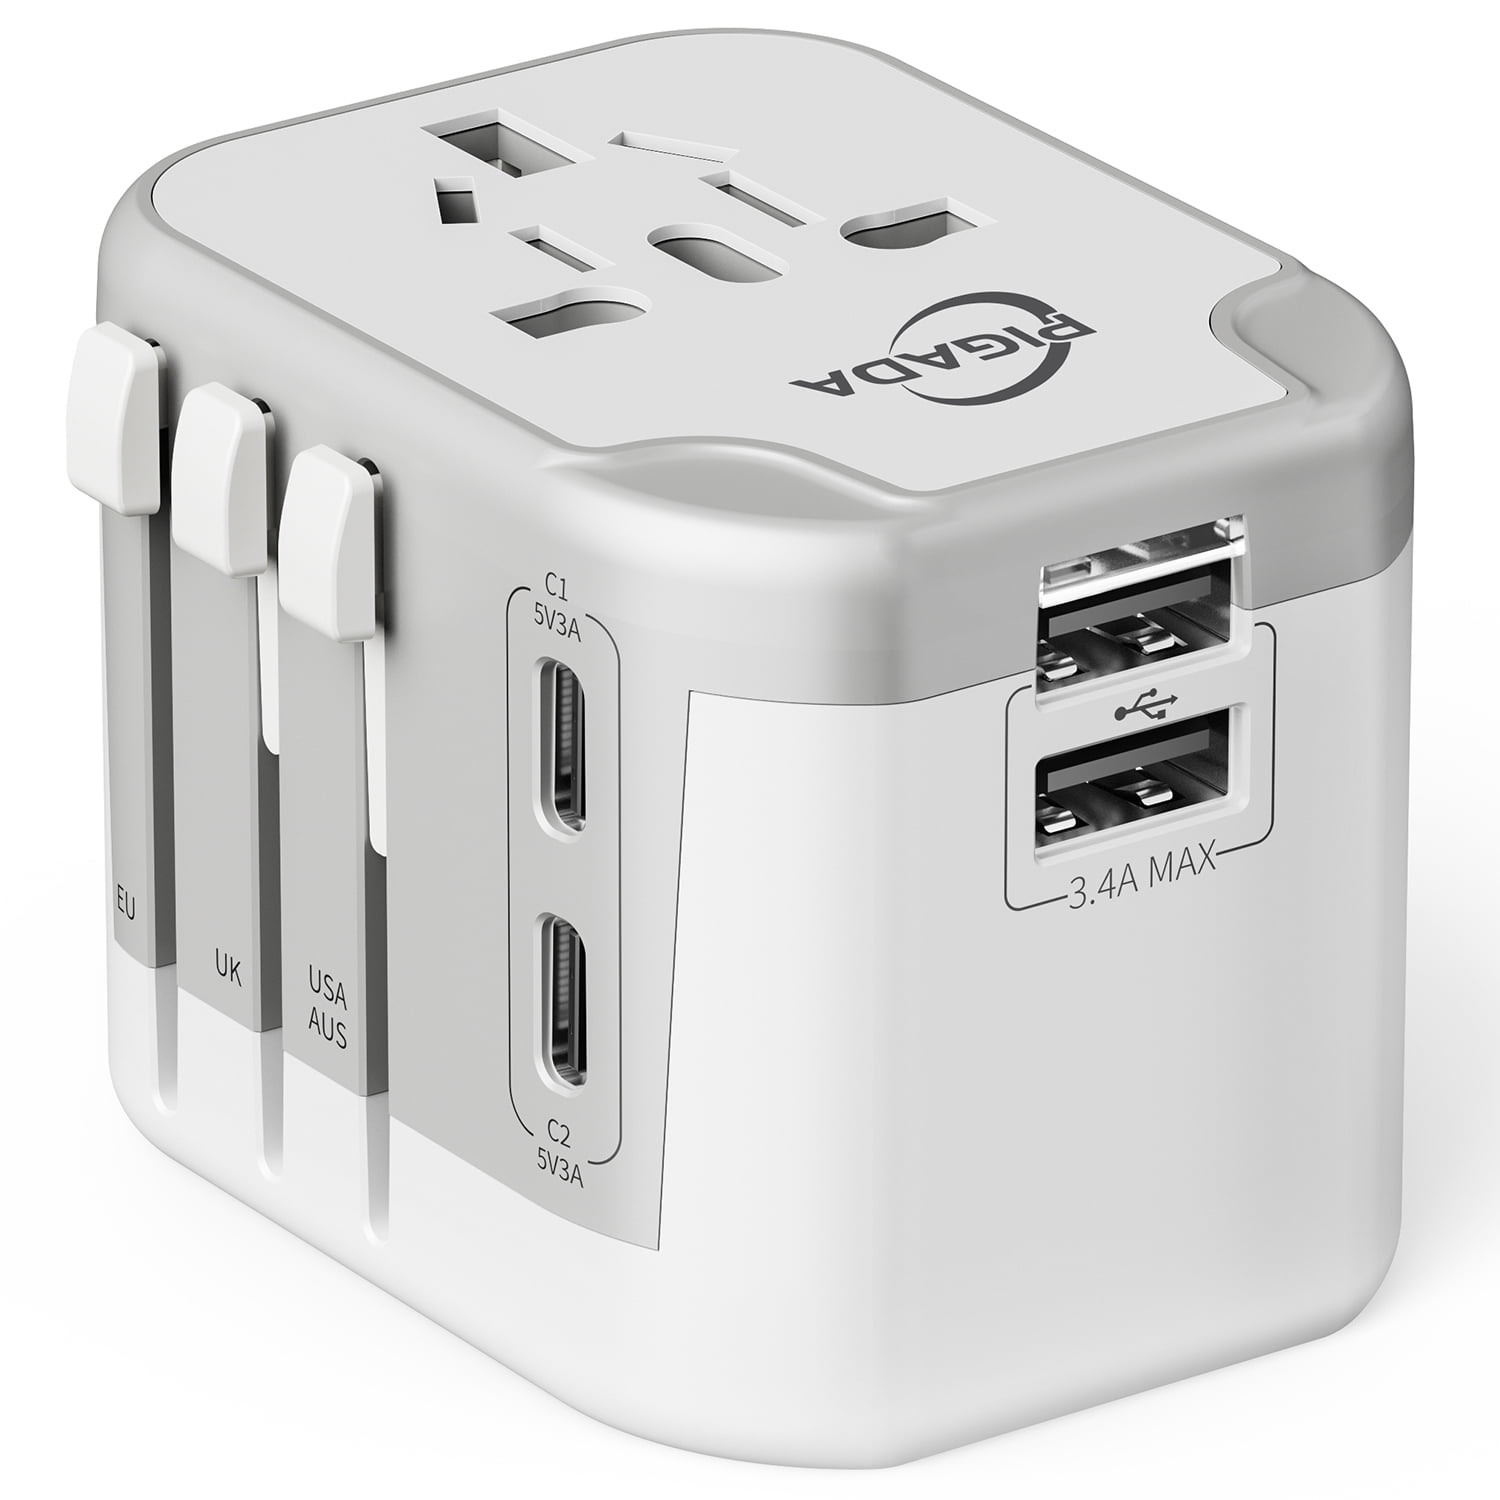 x12 European To American Plug Adapter EU To US USA Charger Outlet Type A  12pc